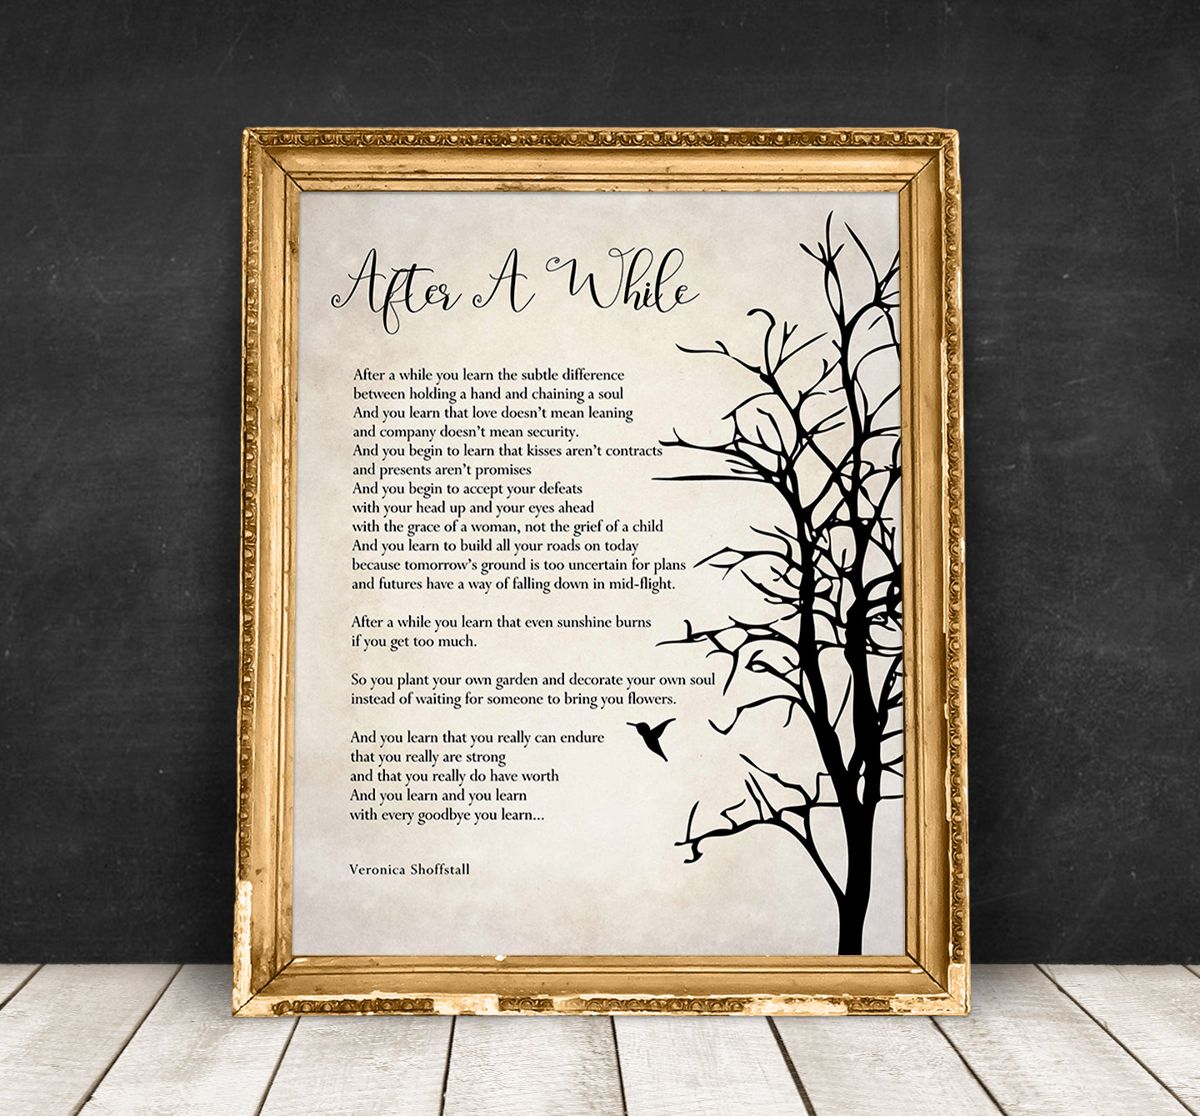 Veronica Shoffstall Love Poem Art Print After A While Poem Poster